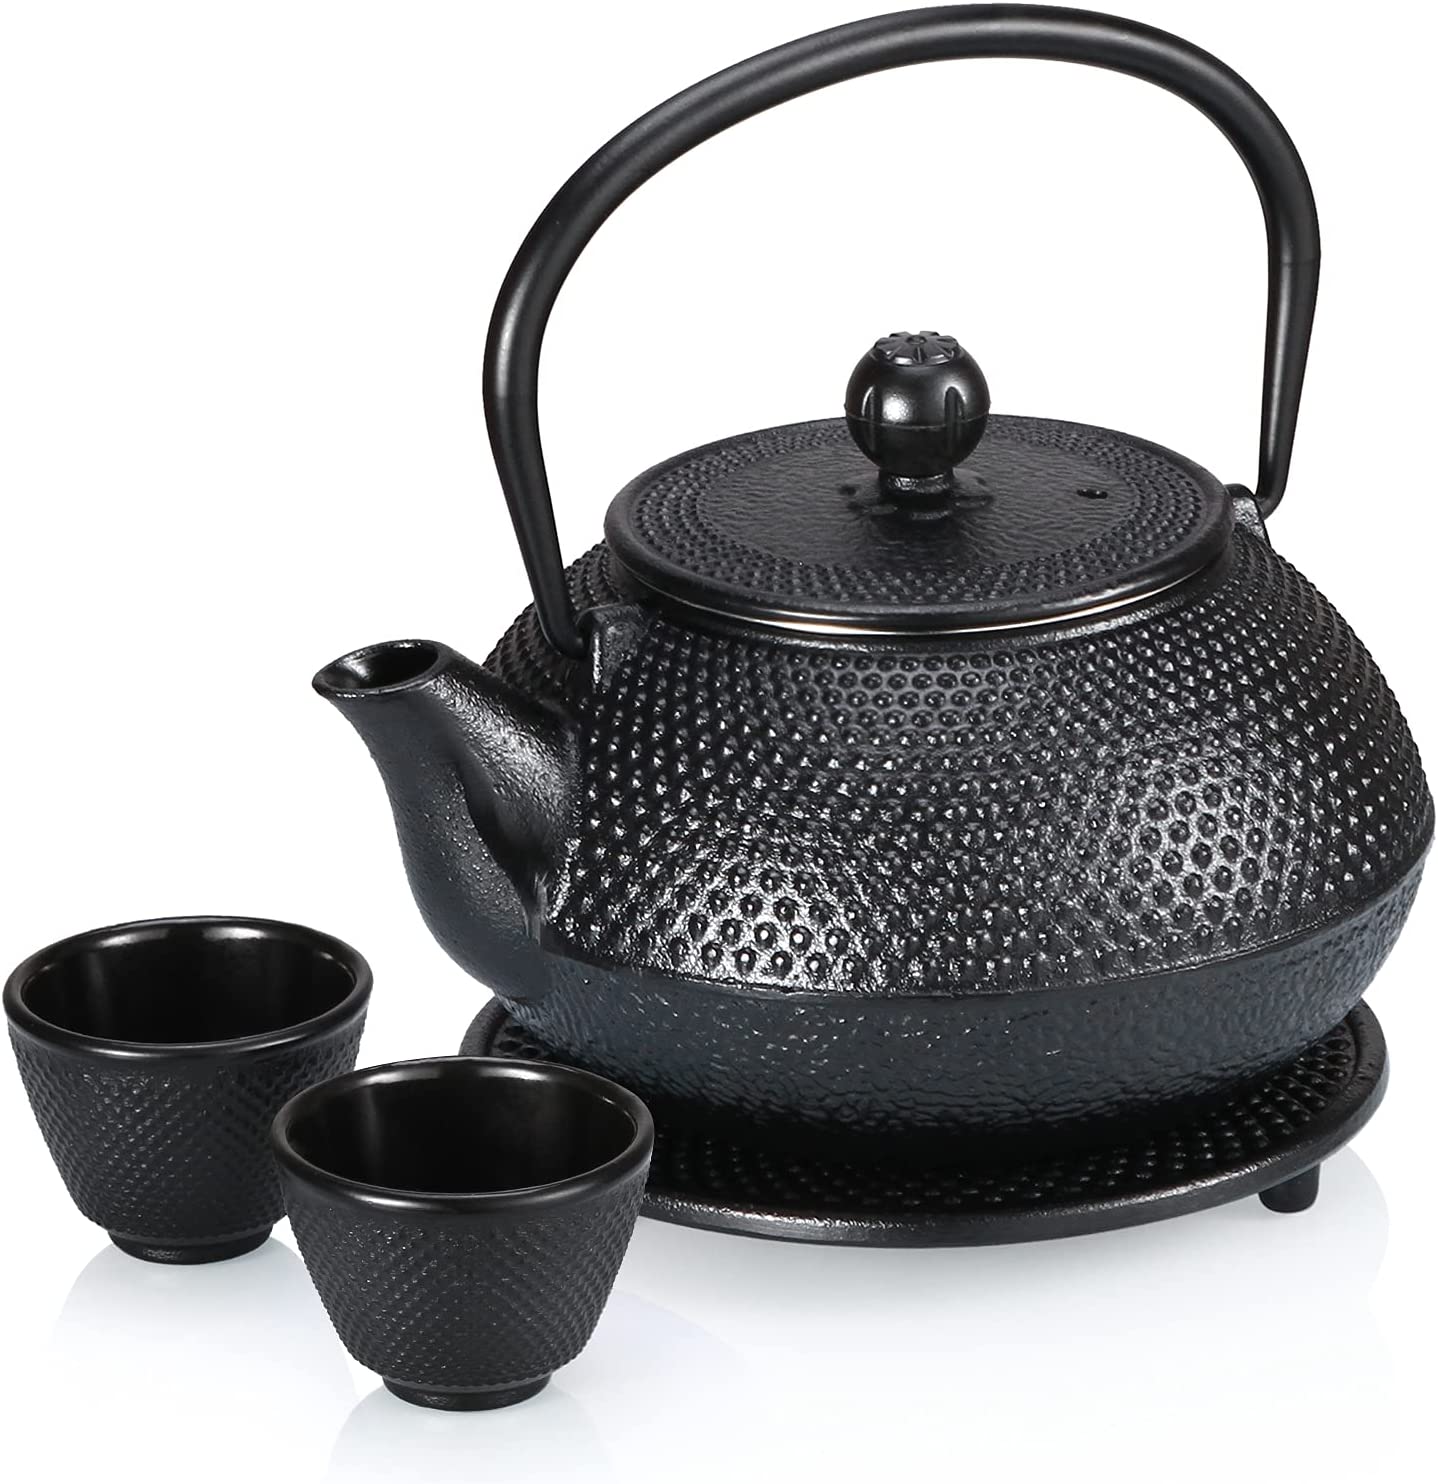 Vobeiy Japanese Cast Iron Teapot, Asian Tea Pot with Removable Stainless Steel Strainer, Japanese Style Teapot, Base and 2 Cups